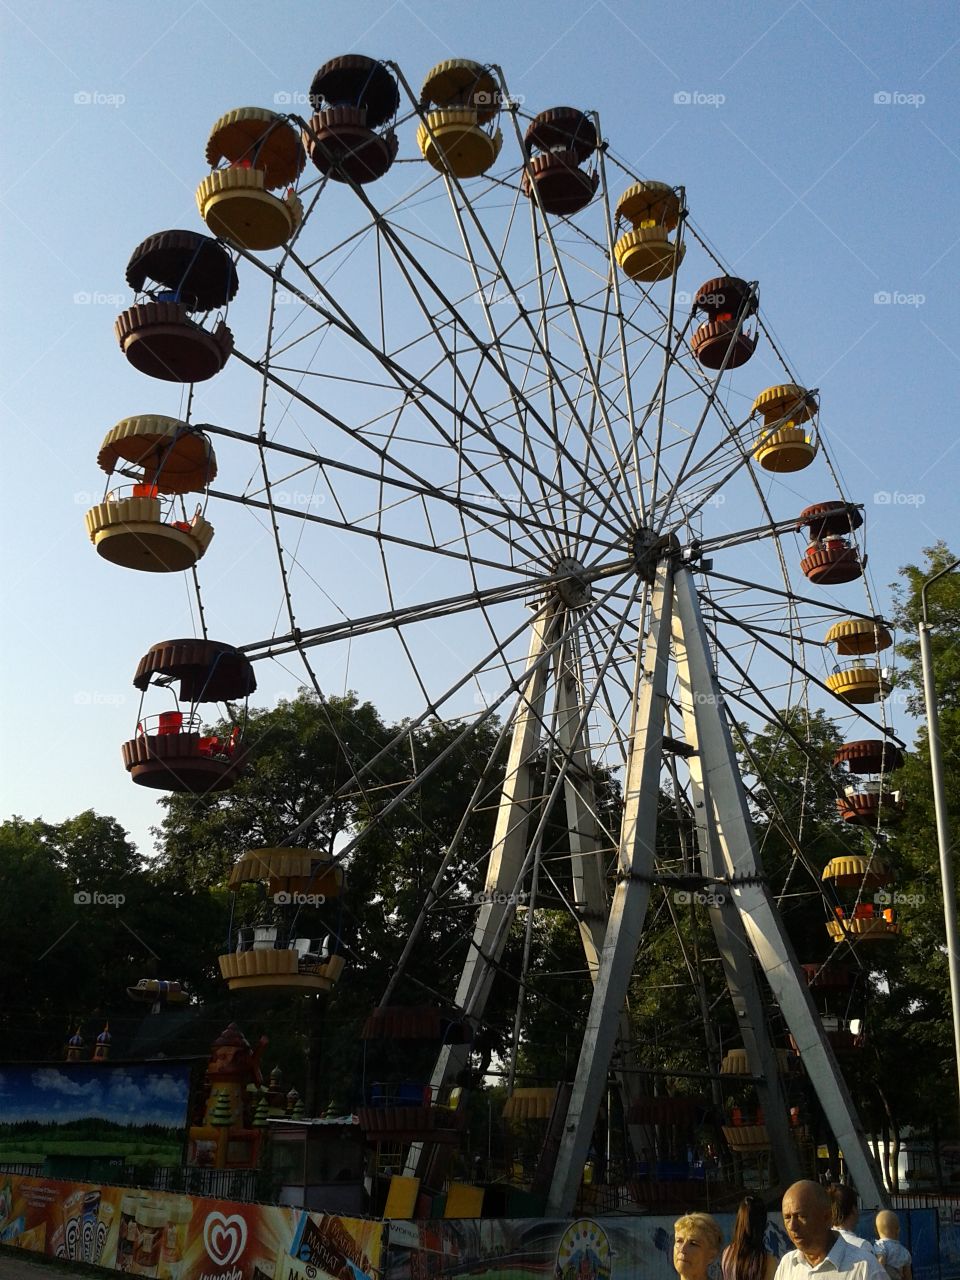 the wheel of view in the city park.